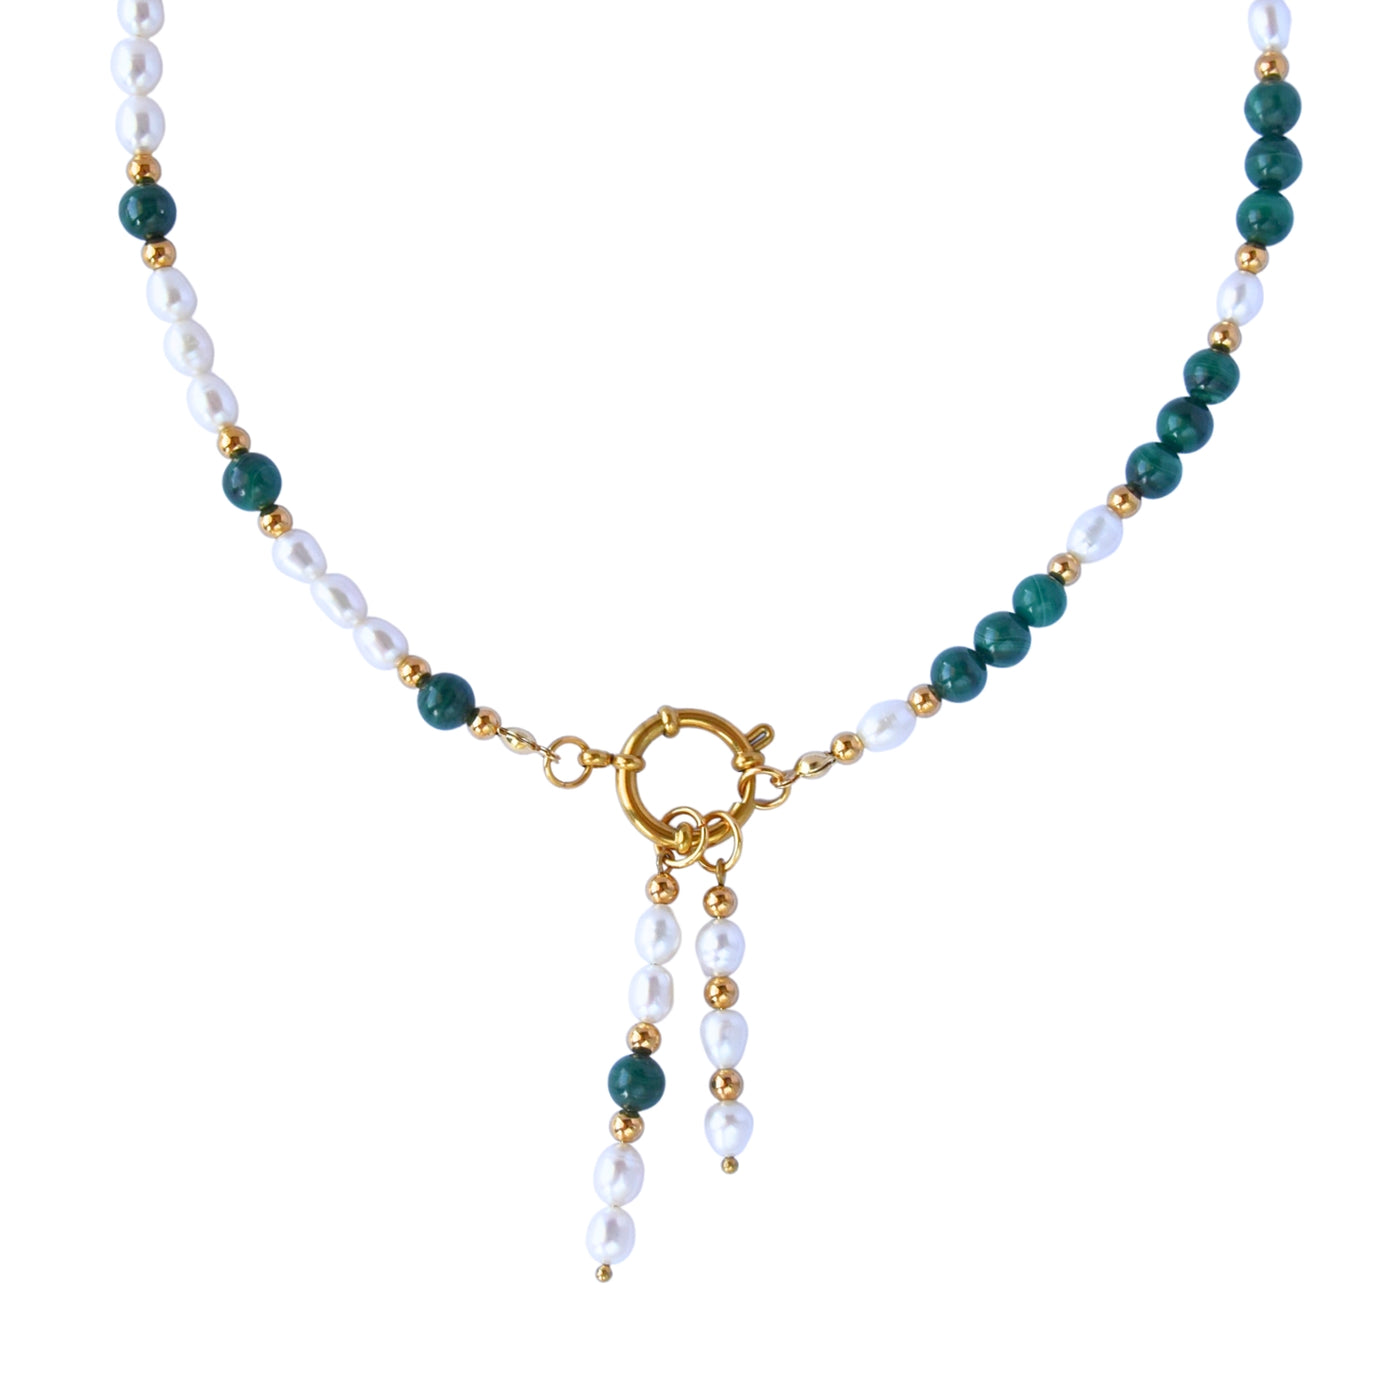 Malachite and freshwater pearl necklace